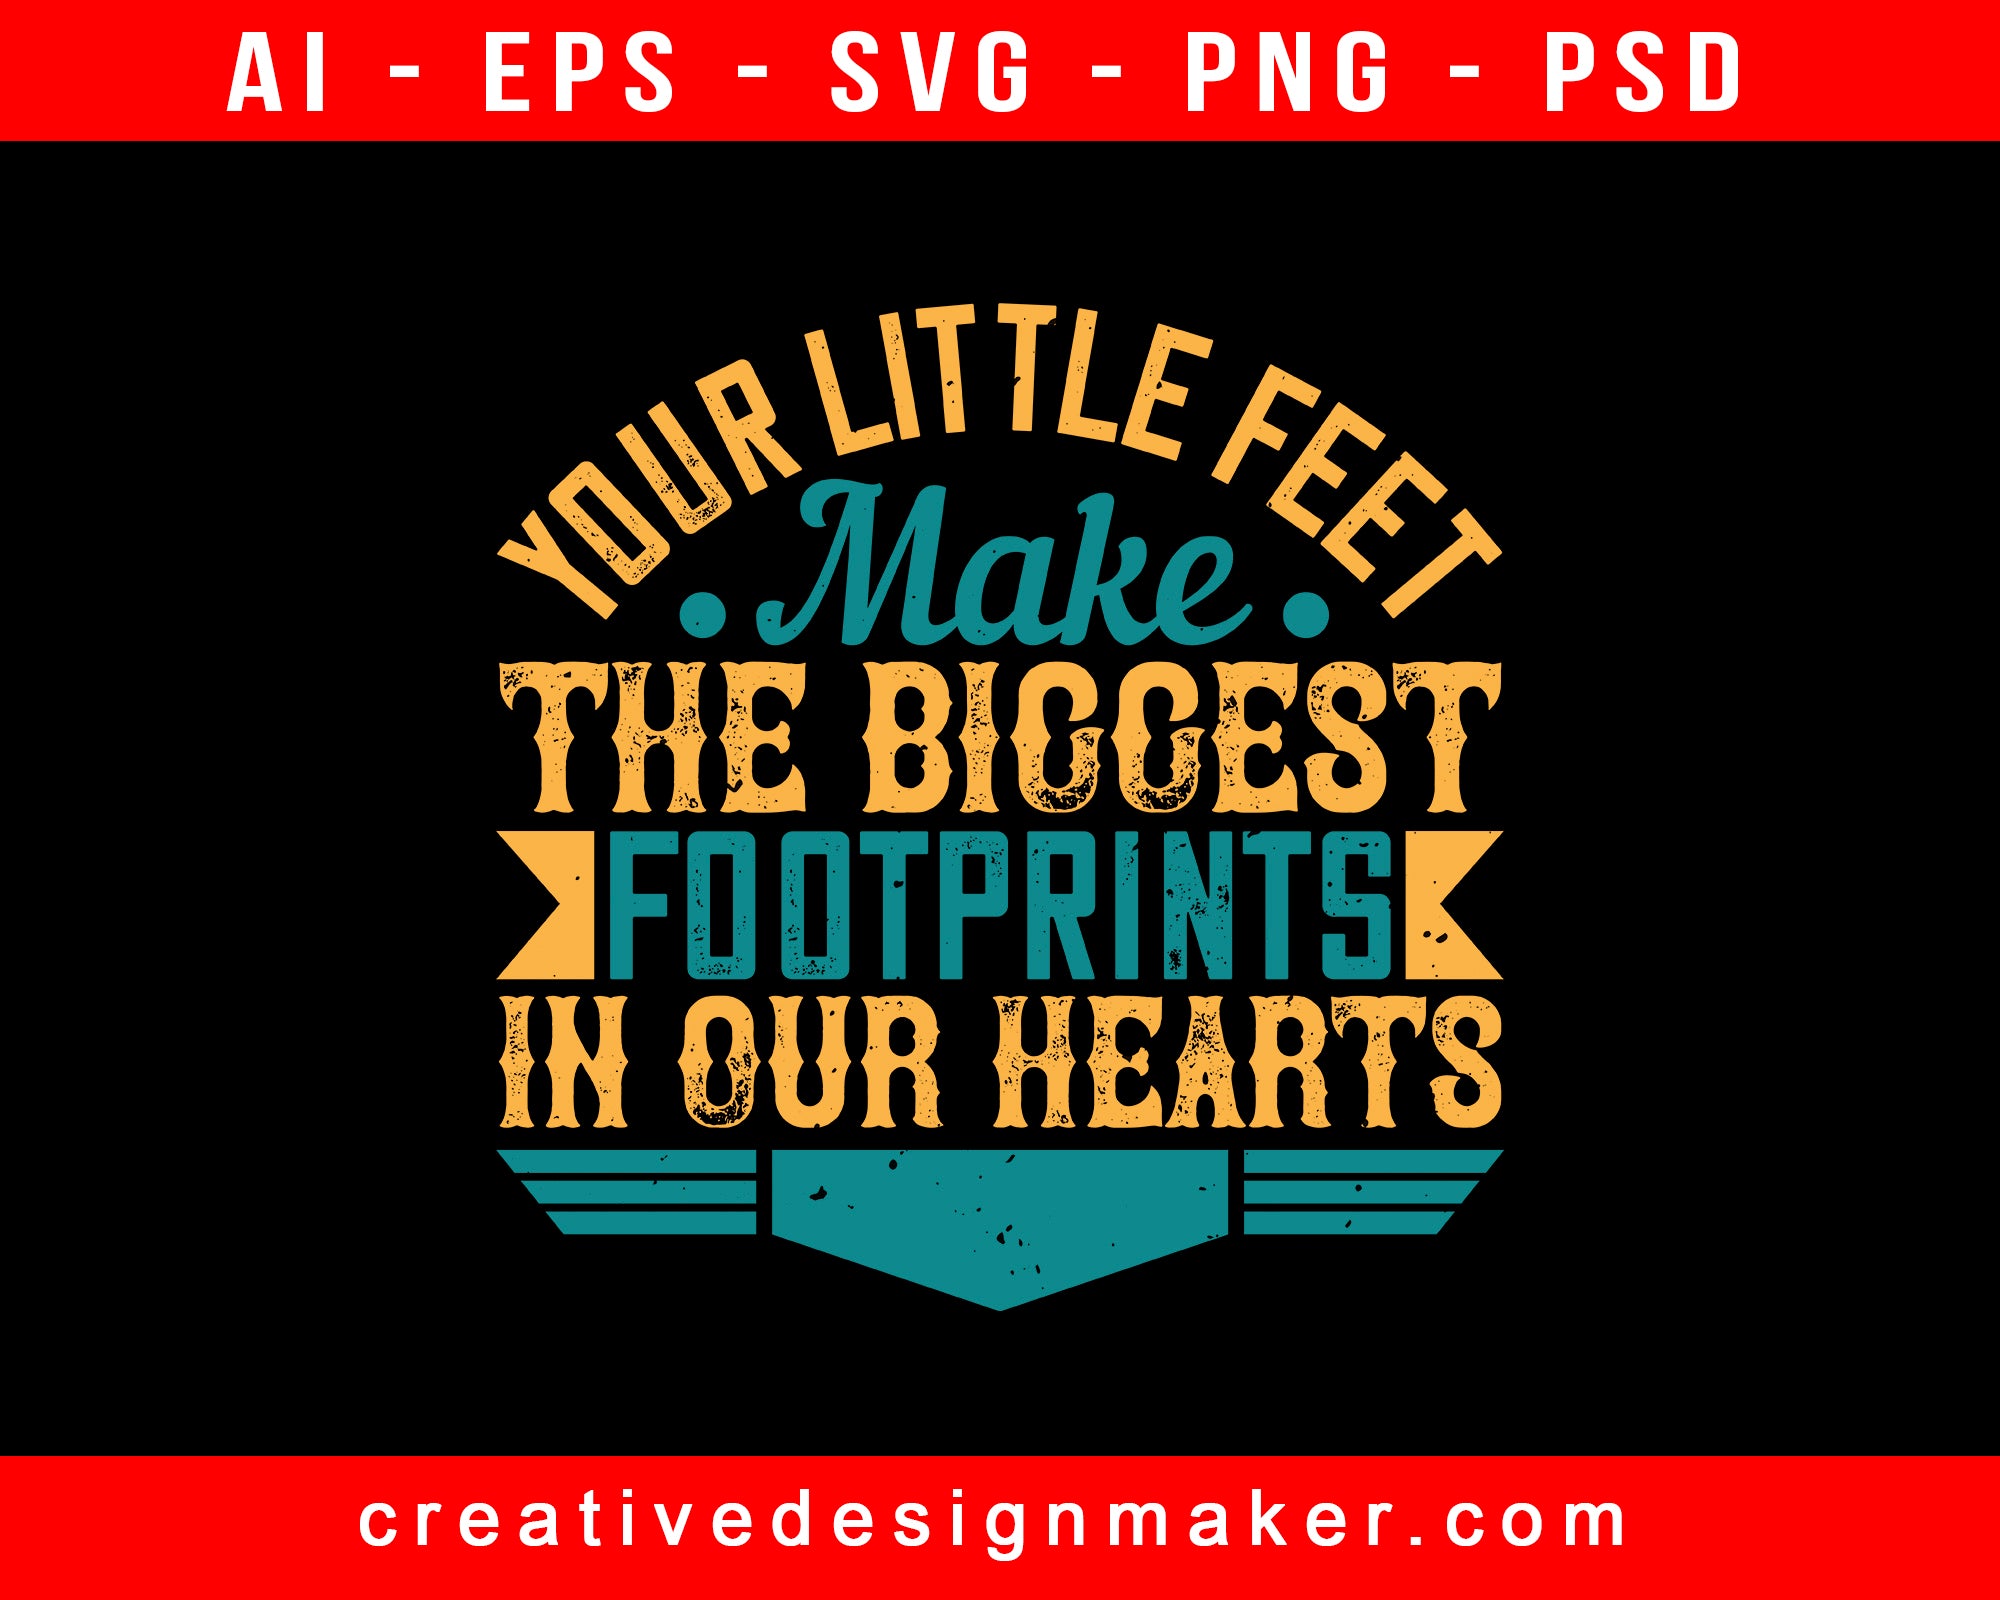 Your Little Feet, Make The Biggest Baby Print Ready Editable T-Shirt SVG Design!